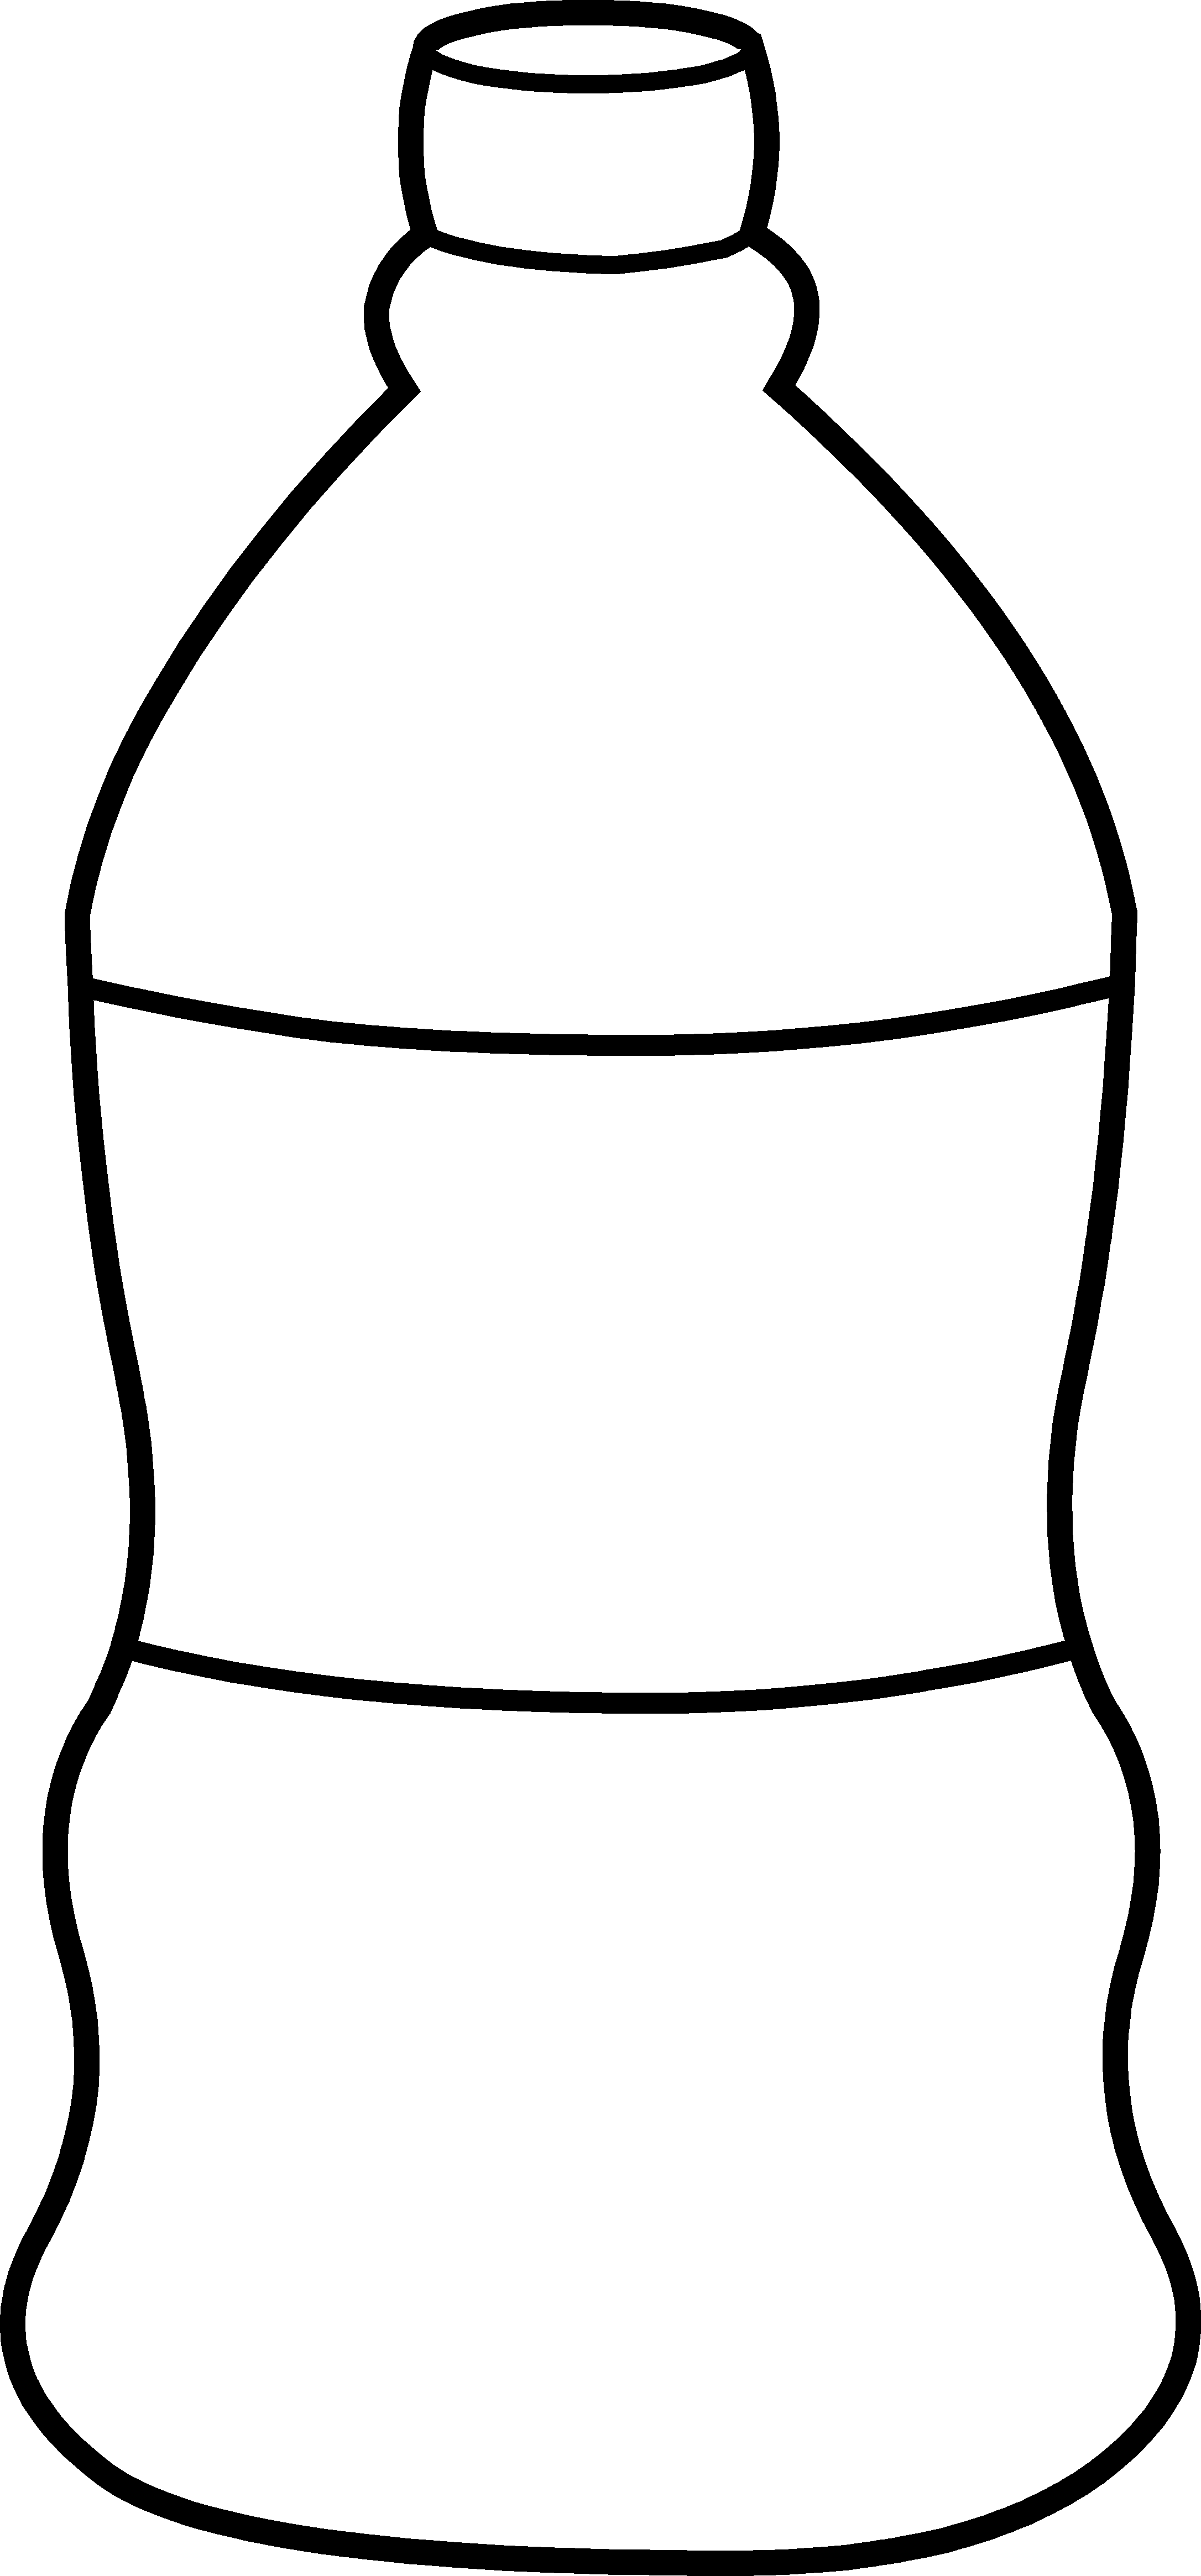 Water container clipart black white